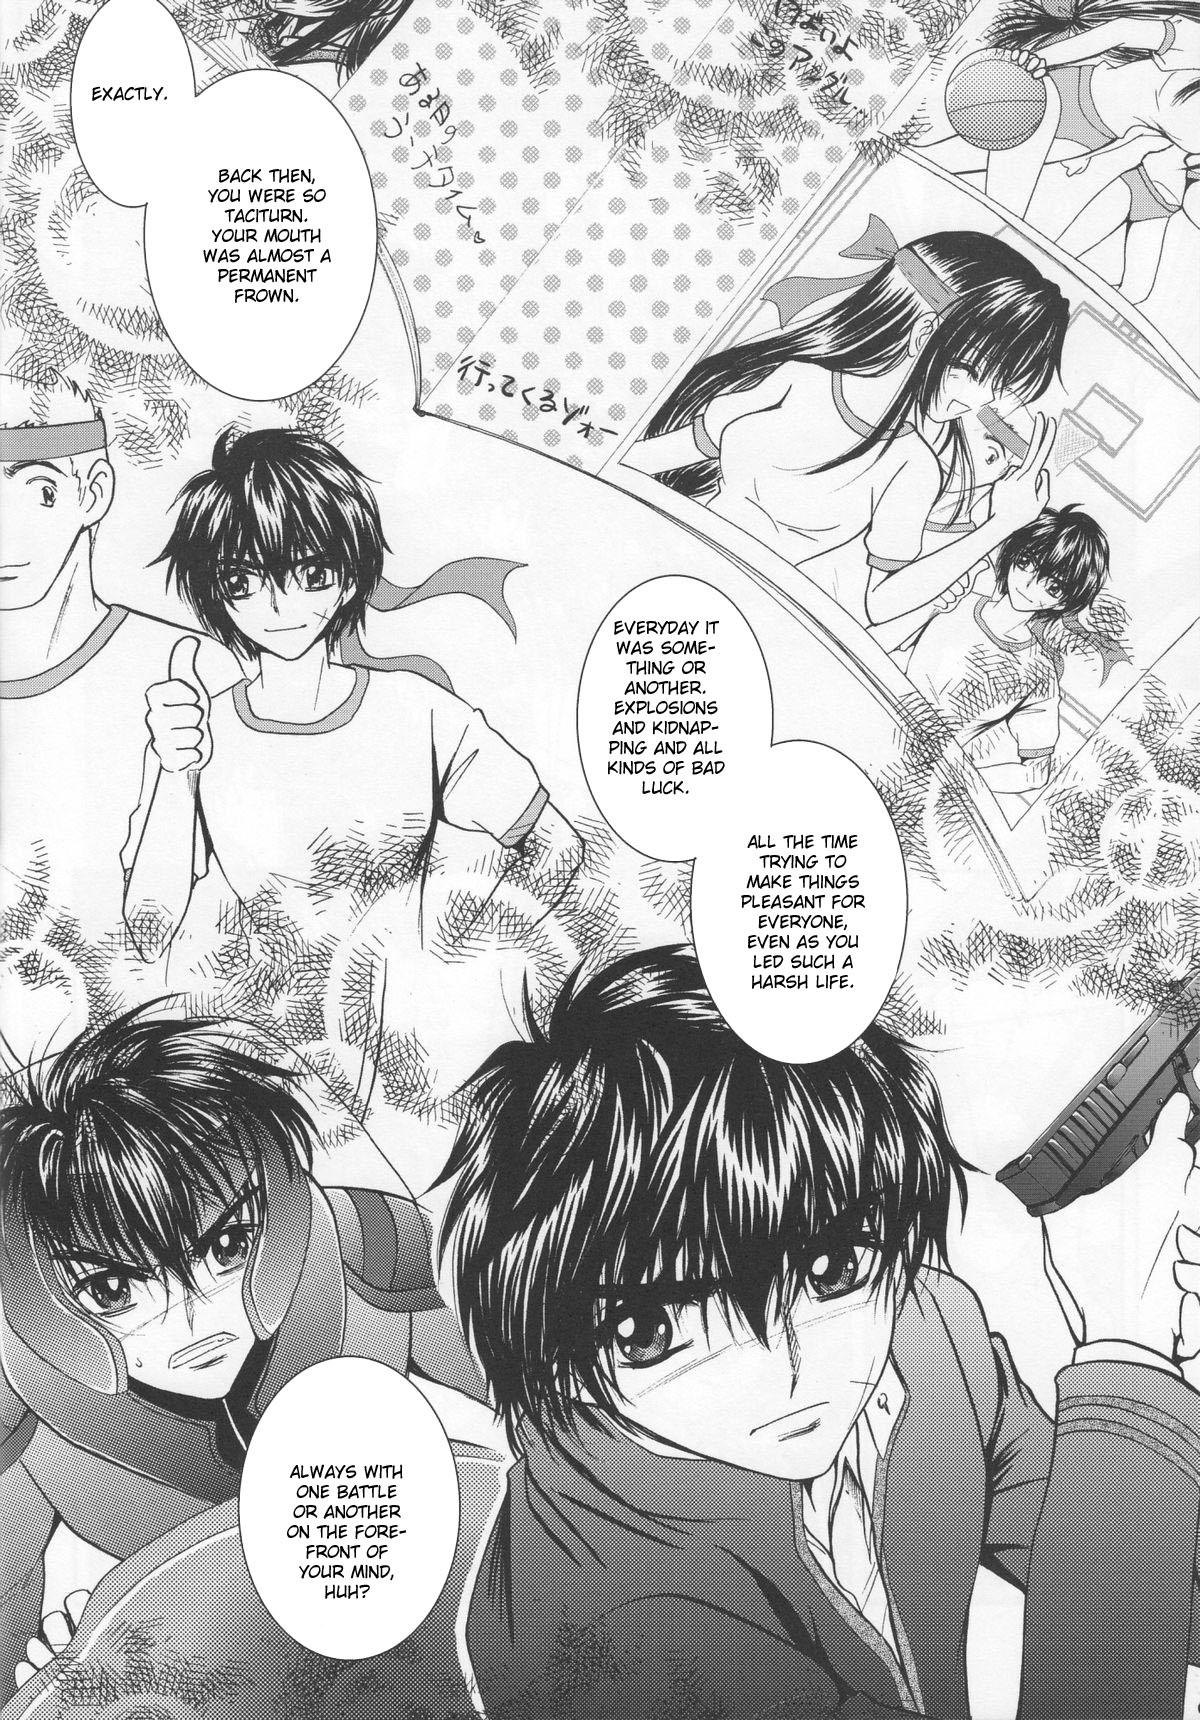 Hotel SEXY PANIC Yappari Sei ga Ichiban!? | Sexy Panic: Their First Time is Without Protection!? - Full metal panic Missionary - Page 5